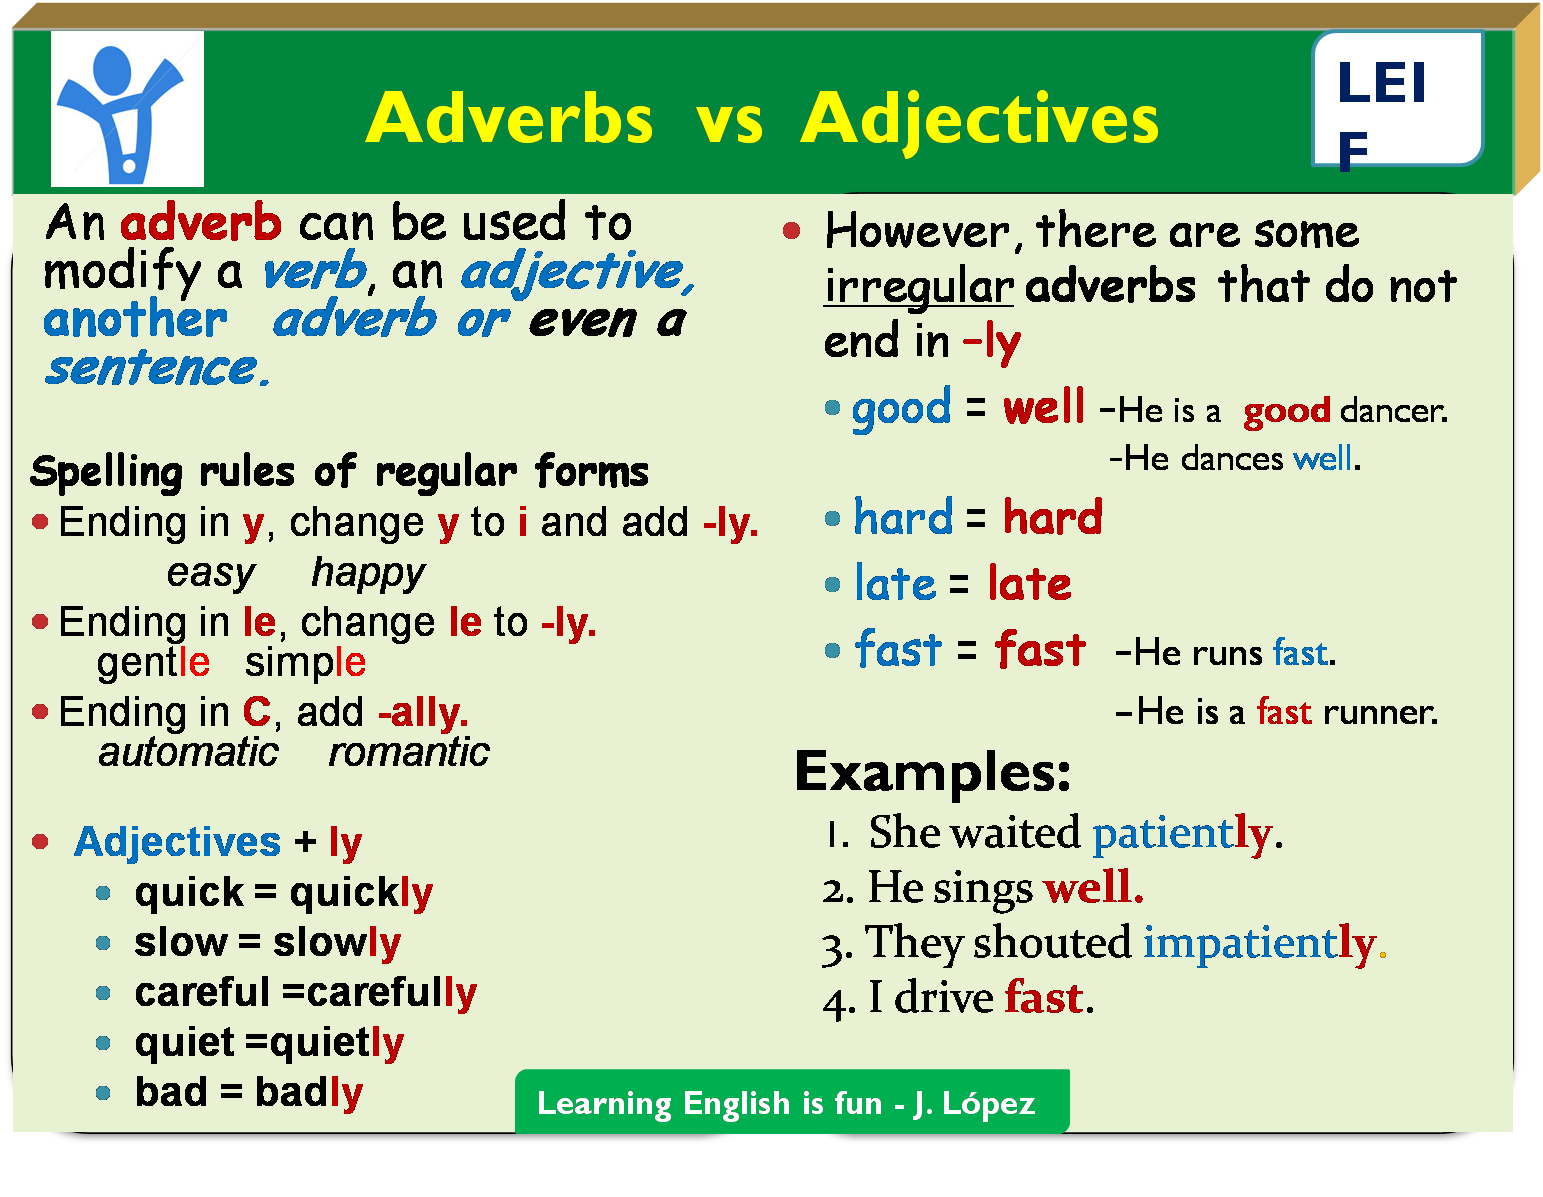 Can well good at. Adverbs and adjectives правила. Adjectives and adverbs правило. Adverbs from adjectives правило. Adverbs правило.